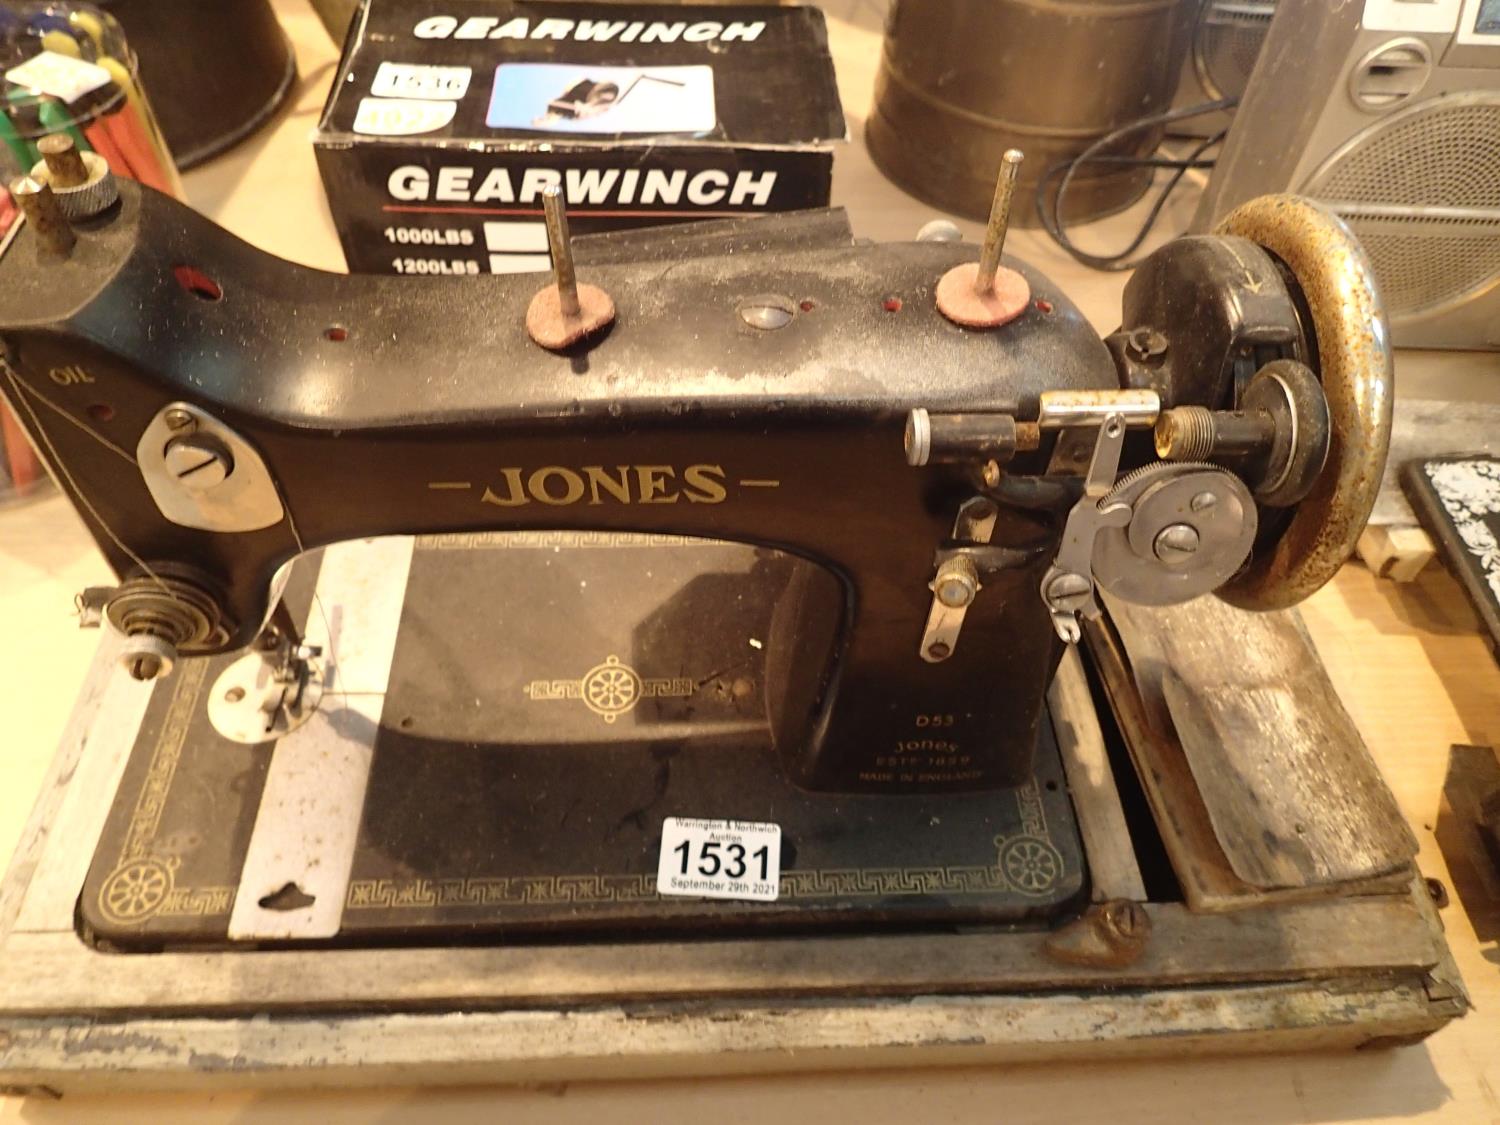 Vintage hand powered Singer sewing machine. Not available for in-house P&P, contact Paul O'Hea at